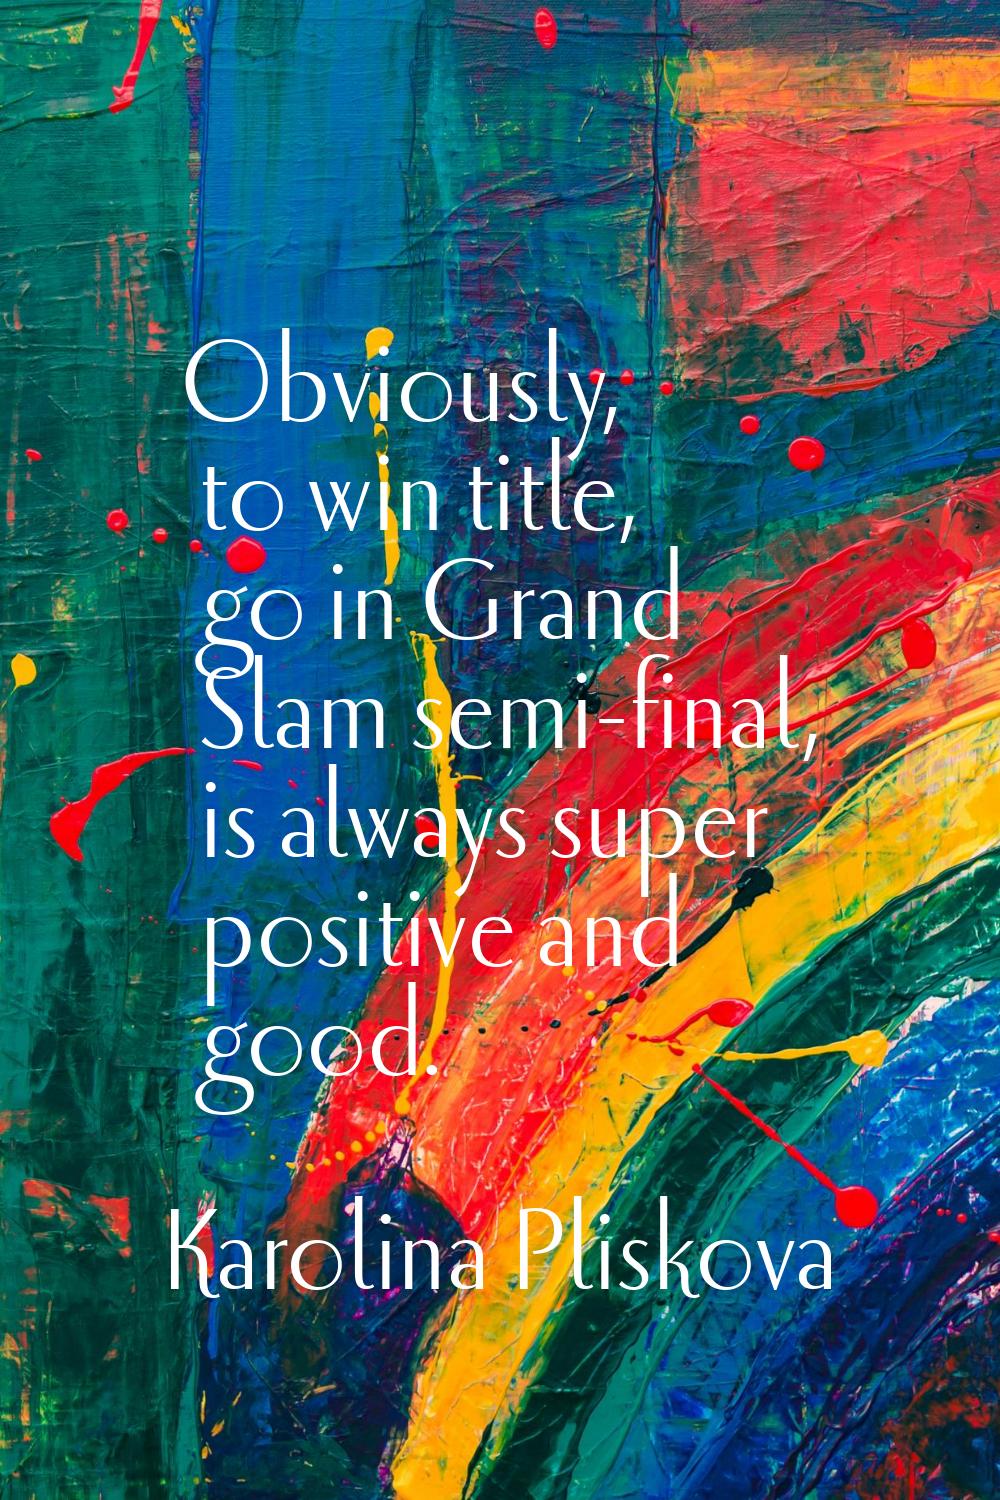 Obviously, to win title, go in Grand Slam semi-final, is always super positive and good.